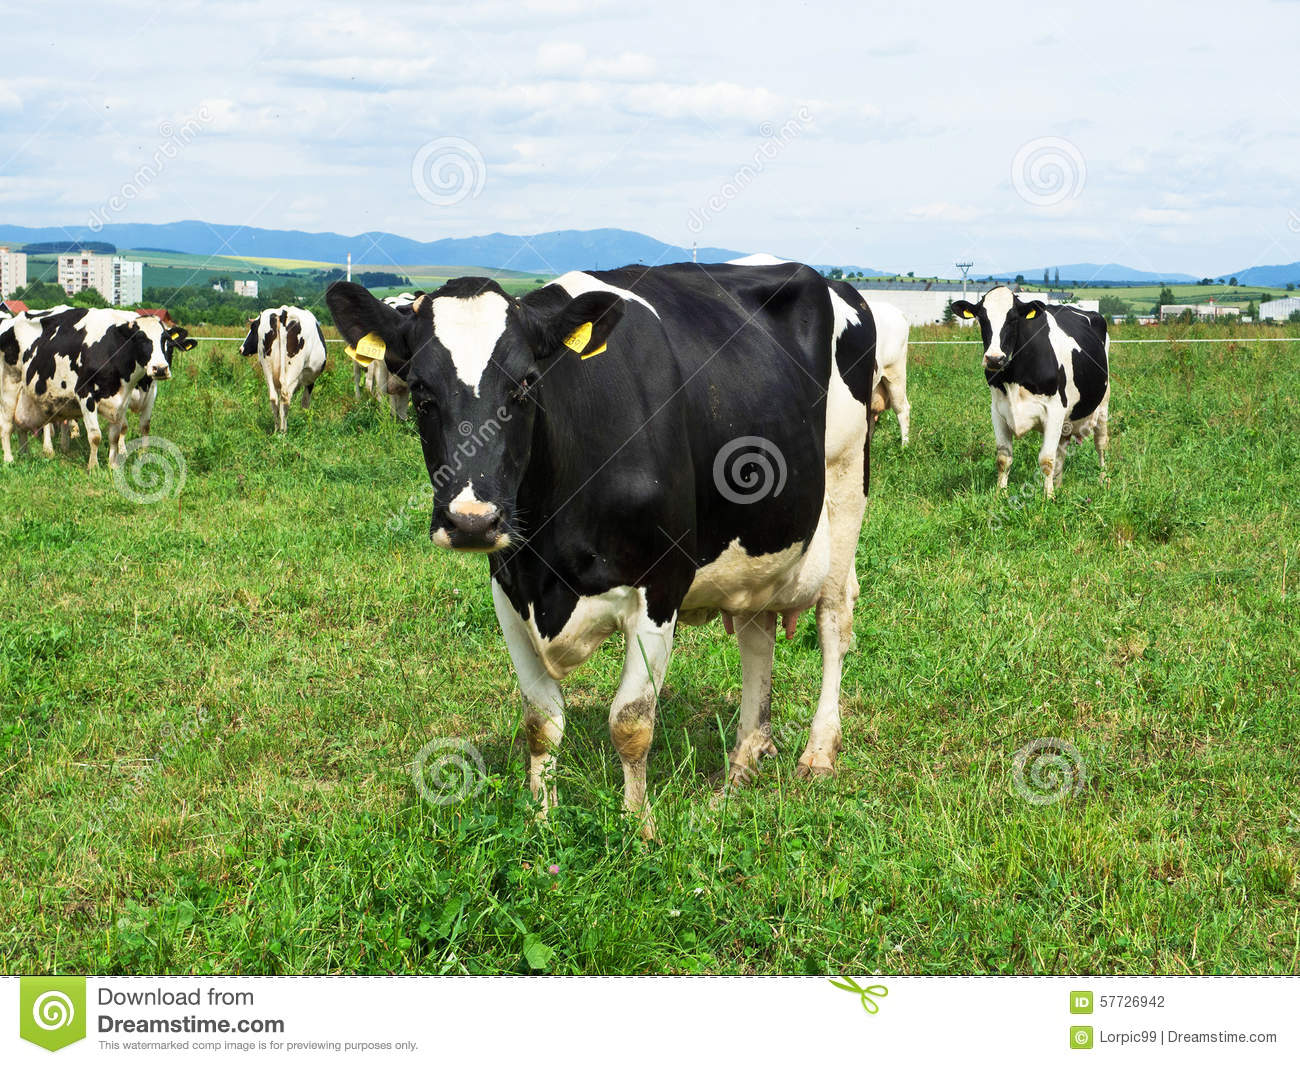 Herd Of Black And White Holstein Friesian Dairy Cattle Grazing In A    